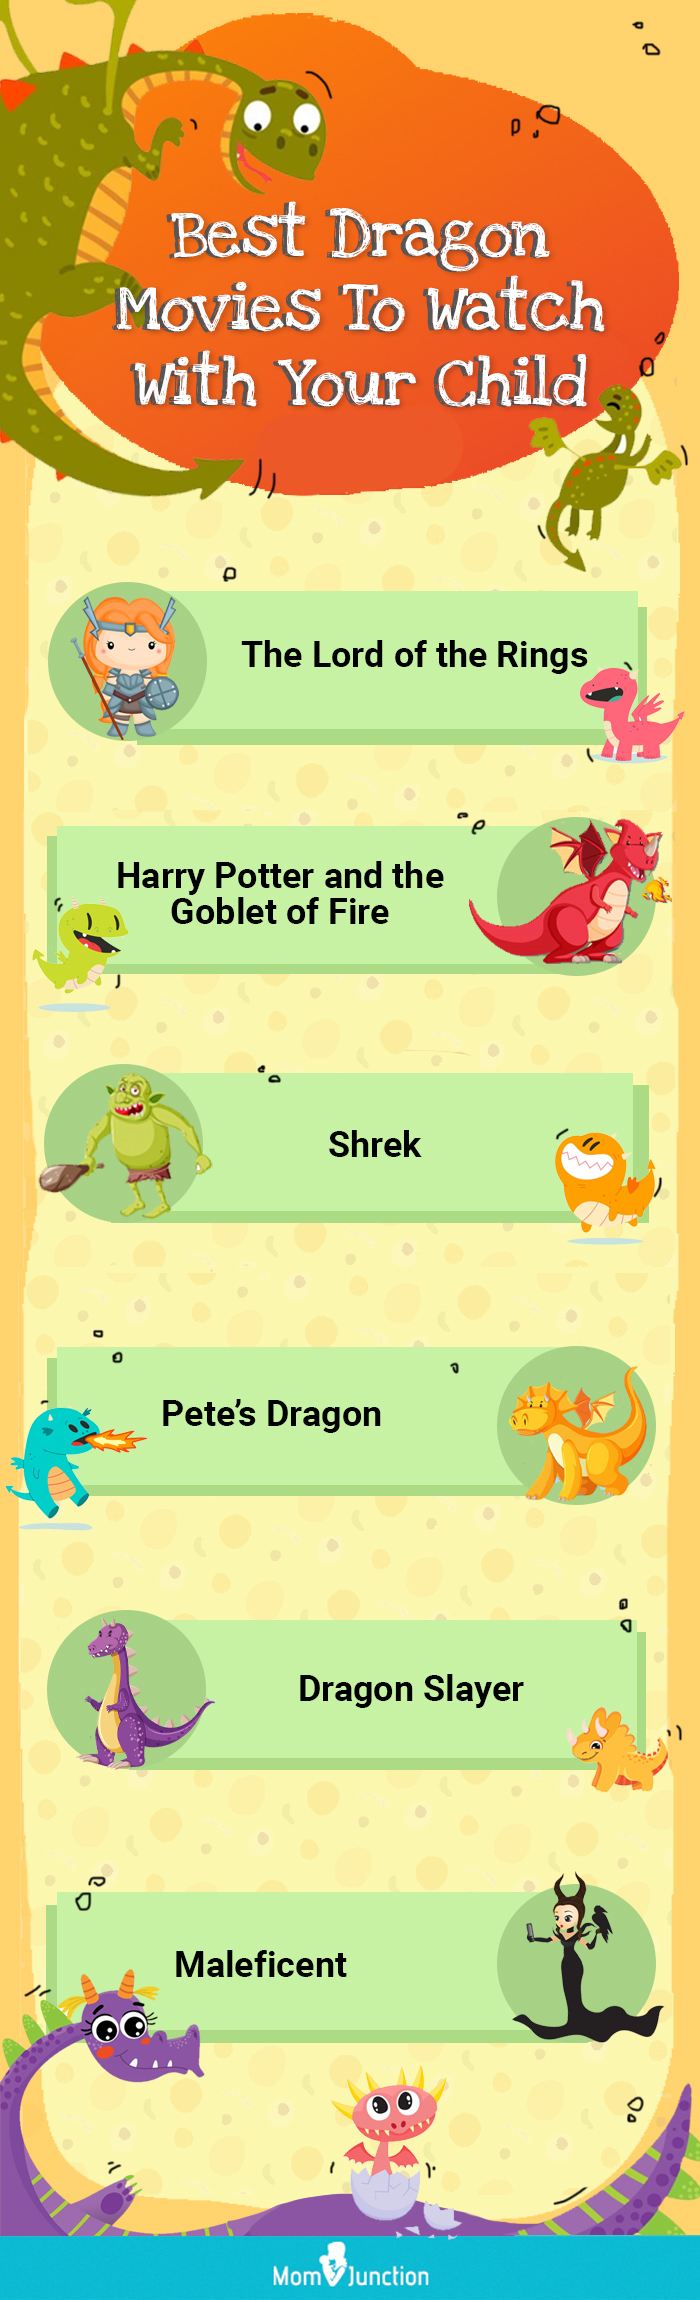 best dragon movies to watch with your child (infographic)